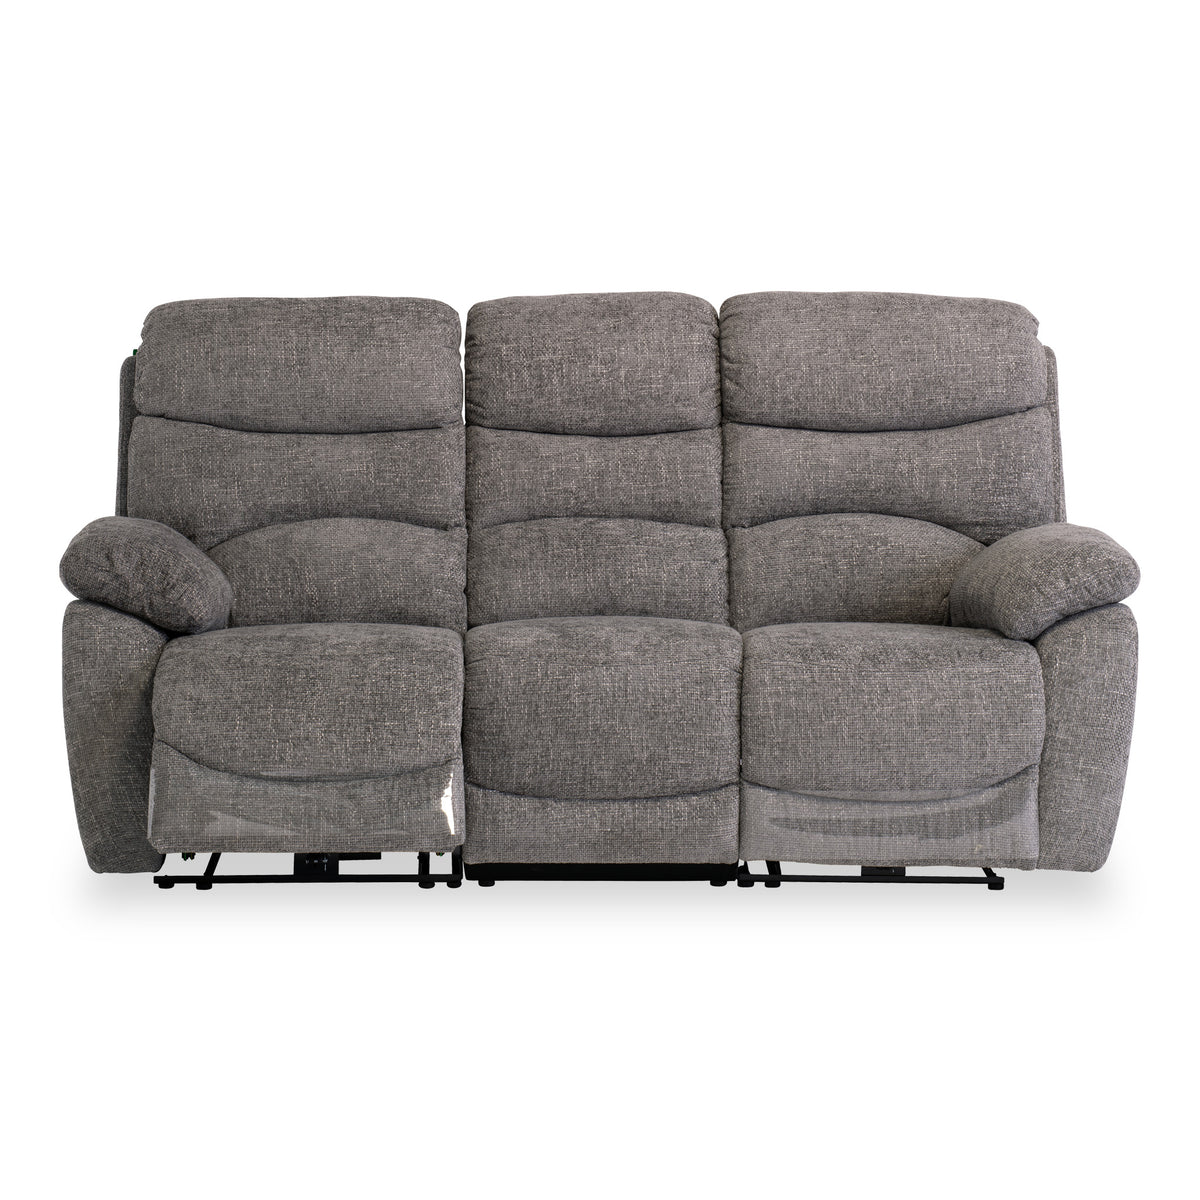 Seville Ash Fabric Electric Reclining 3 Seater Sofa from Roseland Furniture